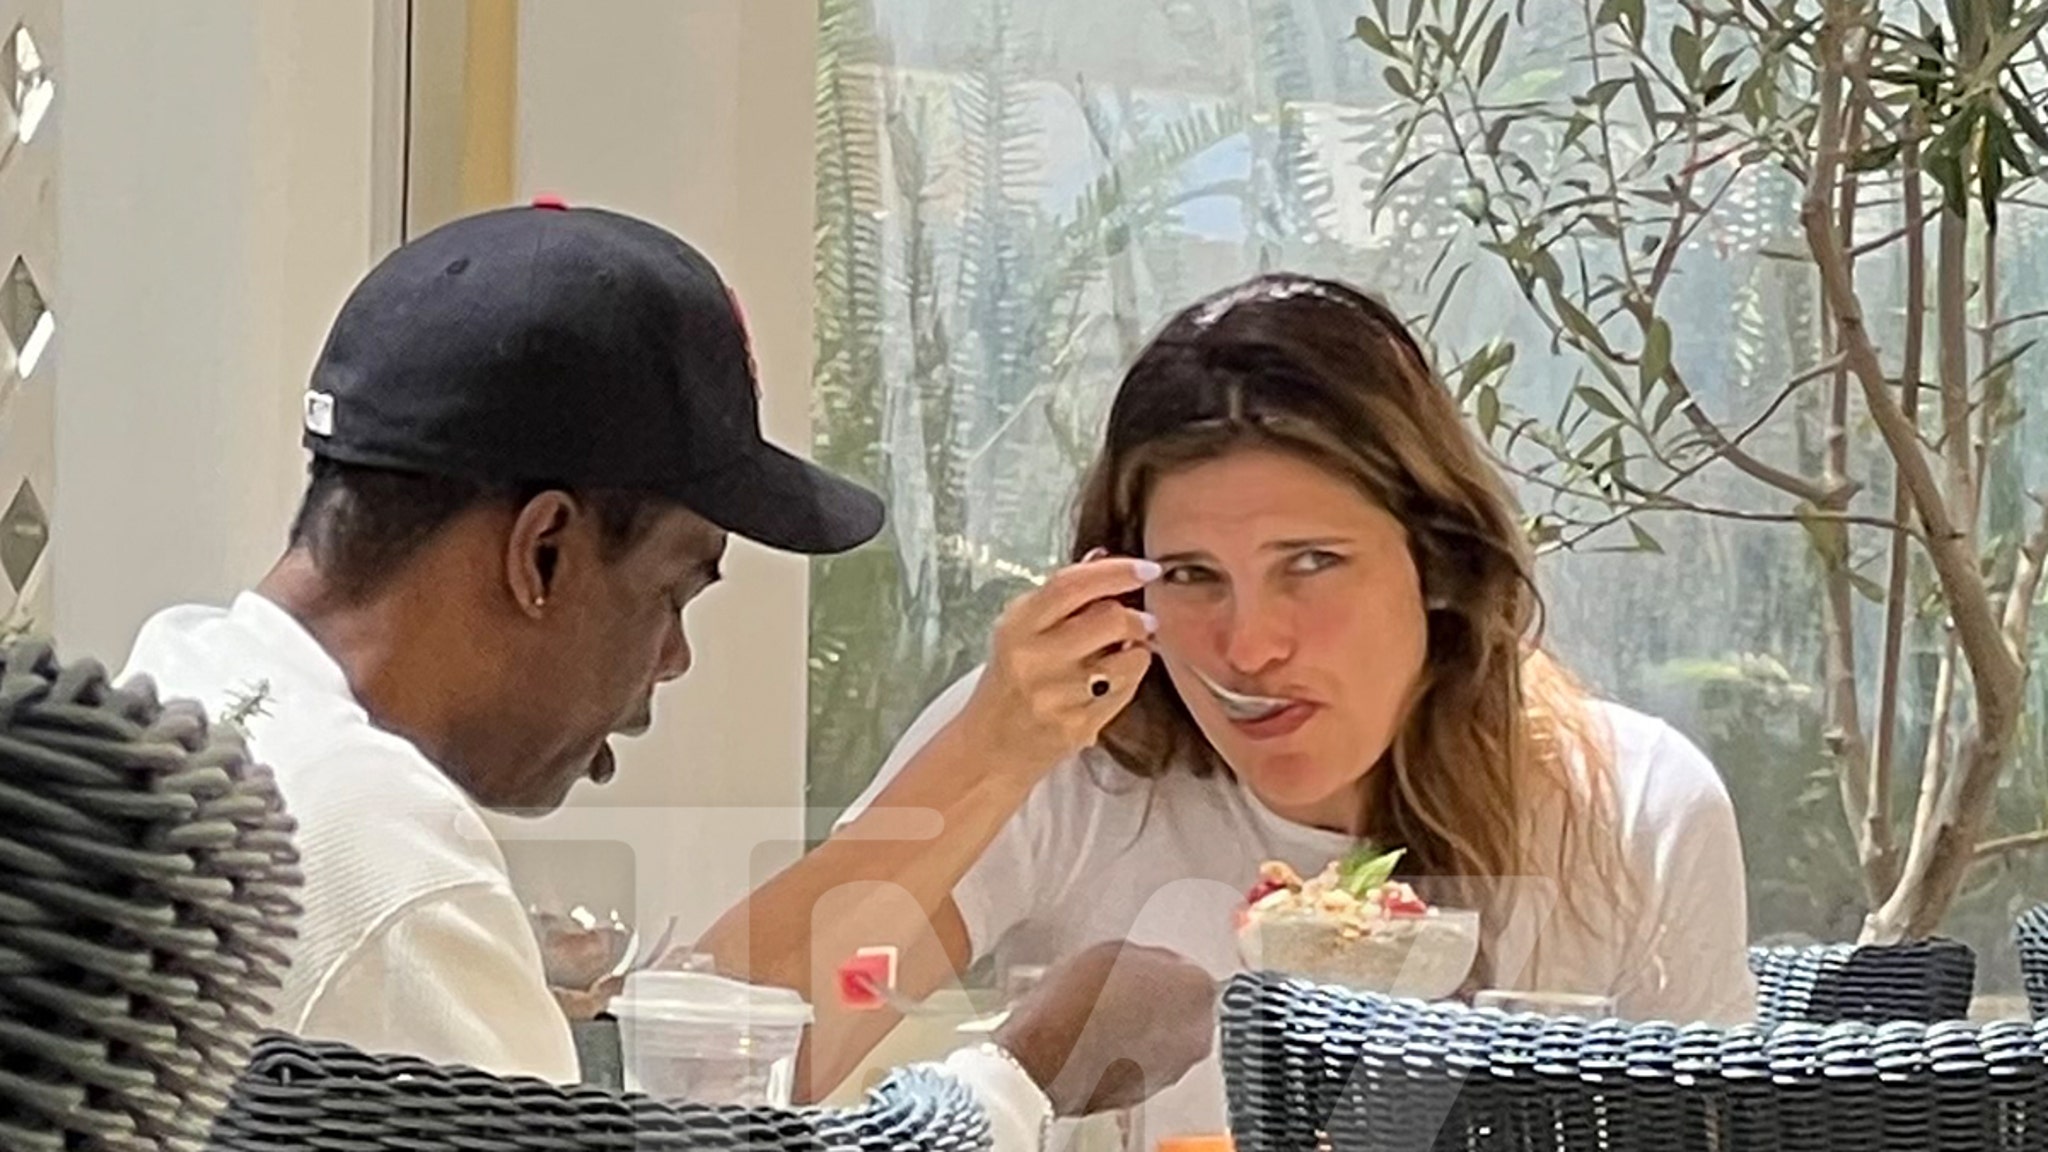 Chris Rock and Lake Bell Hit Brunch Date, Seem to Go Public as Couple - TMZ : Chris Rock and Lake Bell appear to confirm their relationship with multiple outings in L.A. over the holiday weekend.  | Tranquility 國際社群